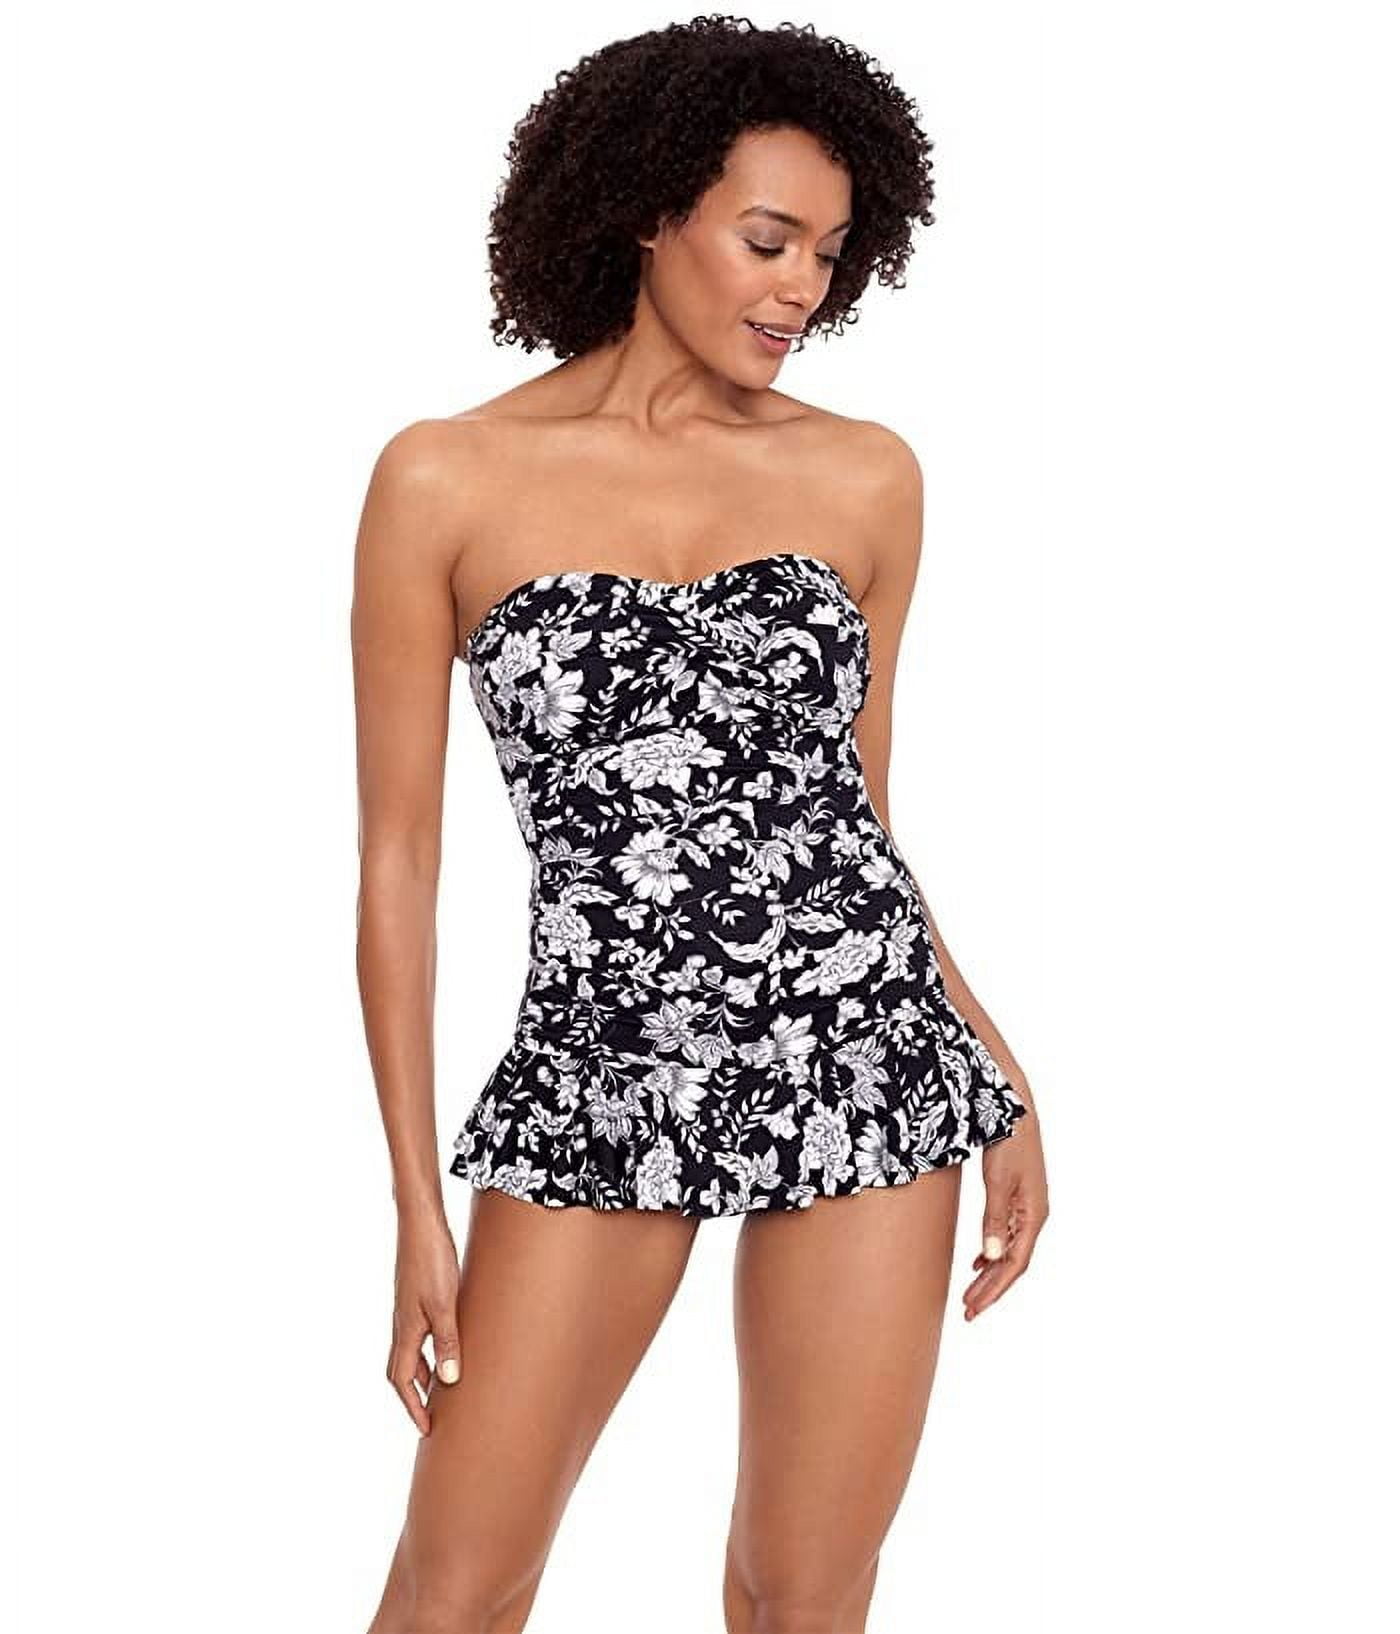 Ralph Lauren BLACK/WHITE Toile Floral Twisted Skirted One-Piece Swimsuit,  US 6 